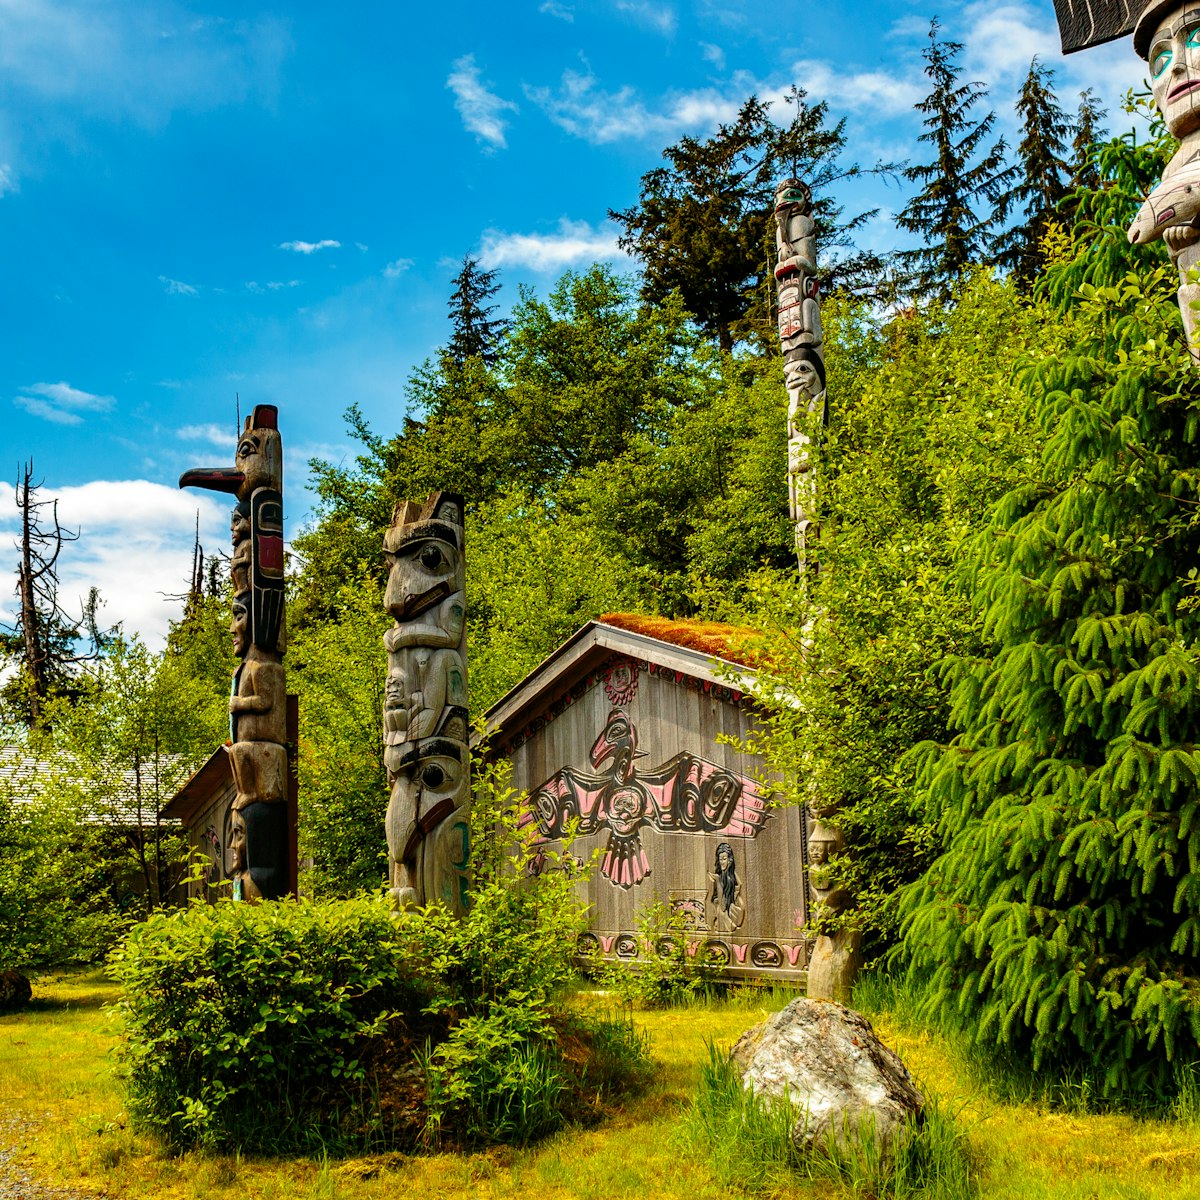 Native American Totems and Clan Houses located at Totem Bight State Historic Site.